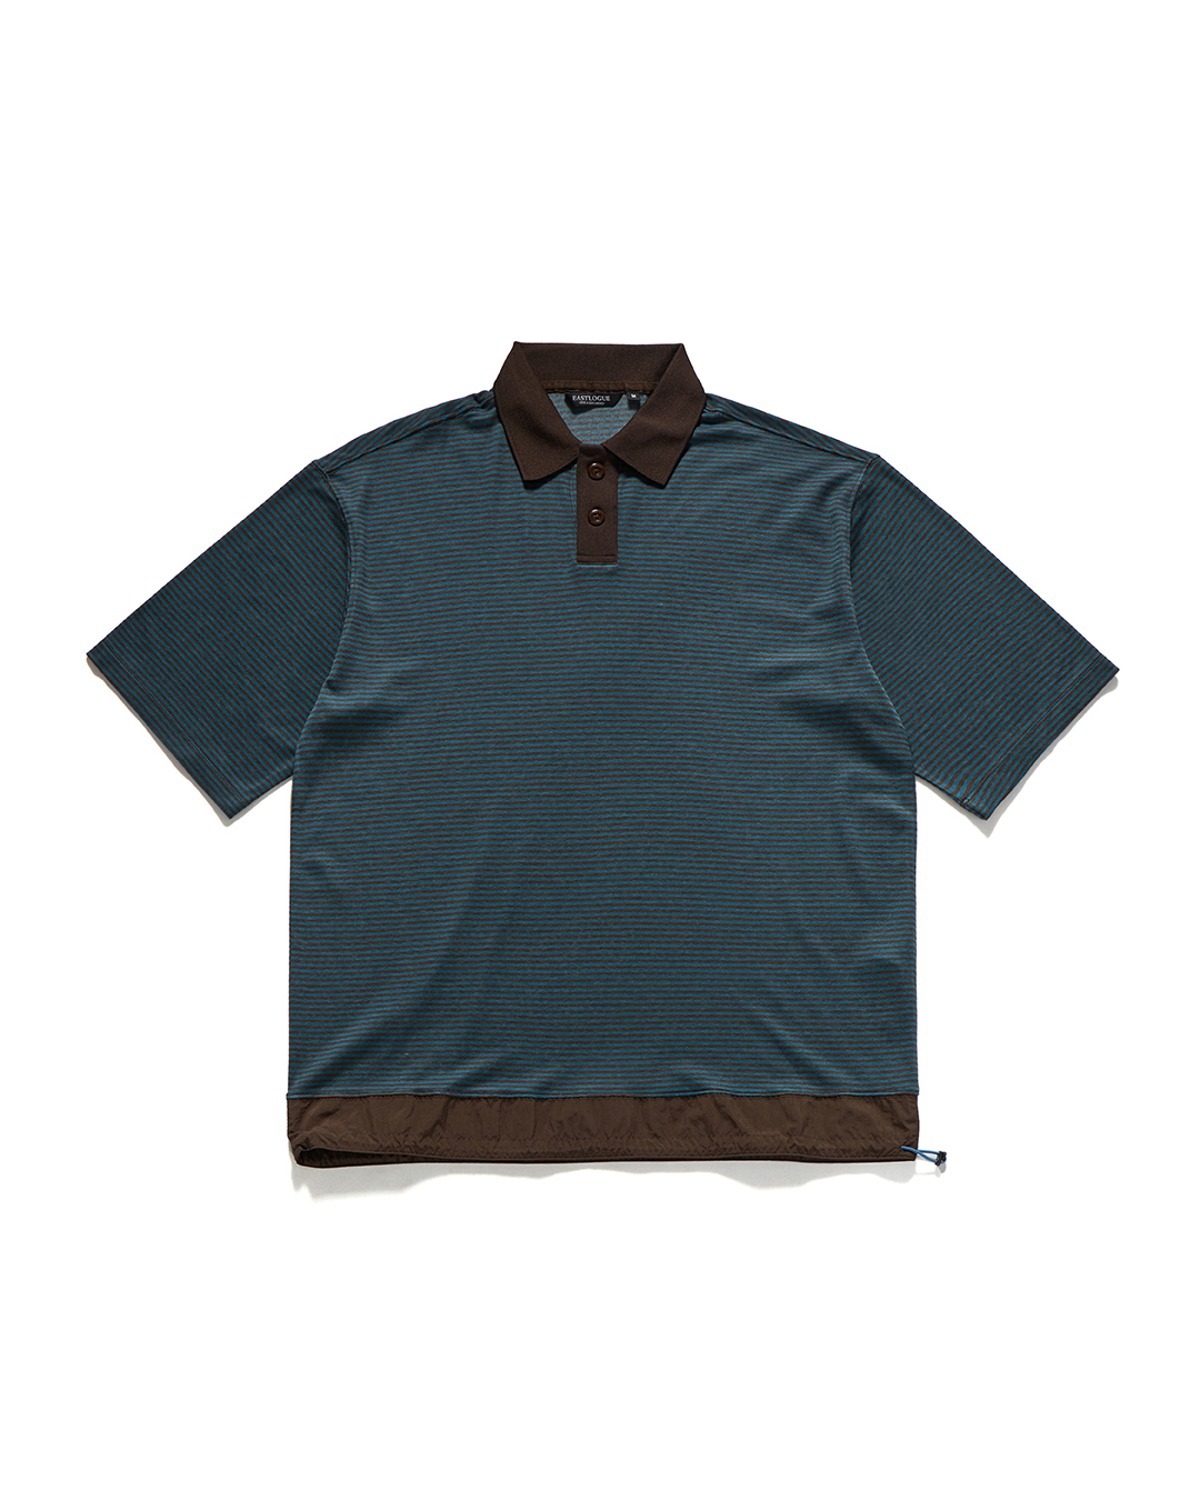 FUNCTIONAL RELAXED POLO SHIRT / BROWN STRIPE